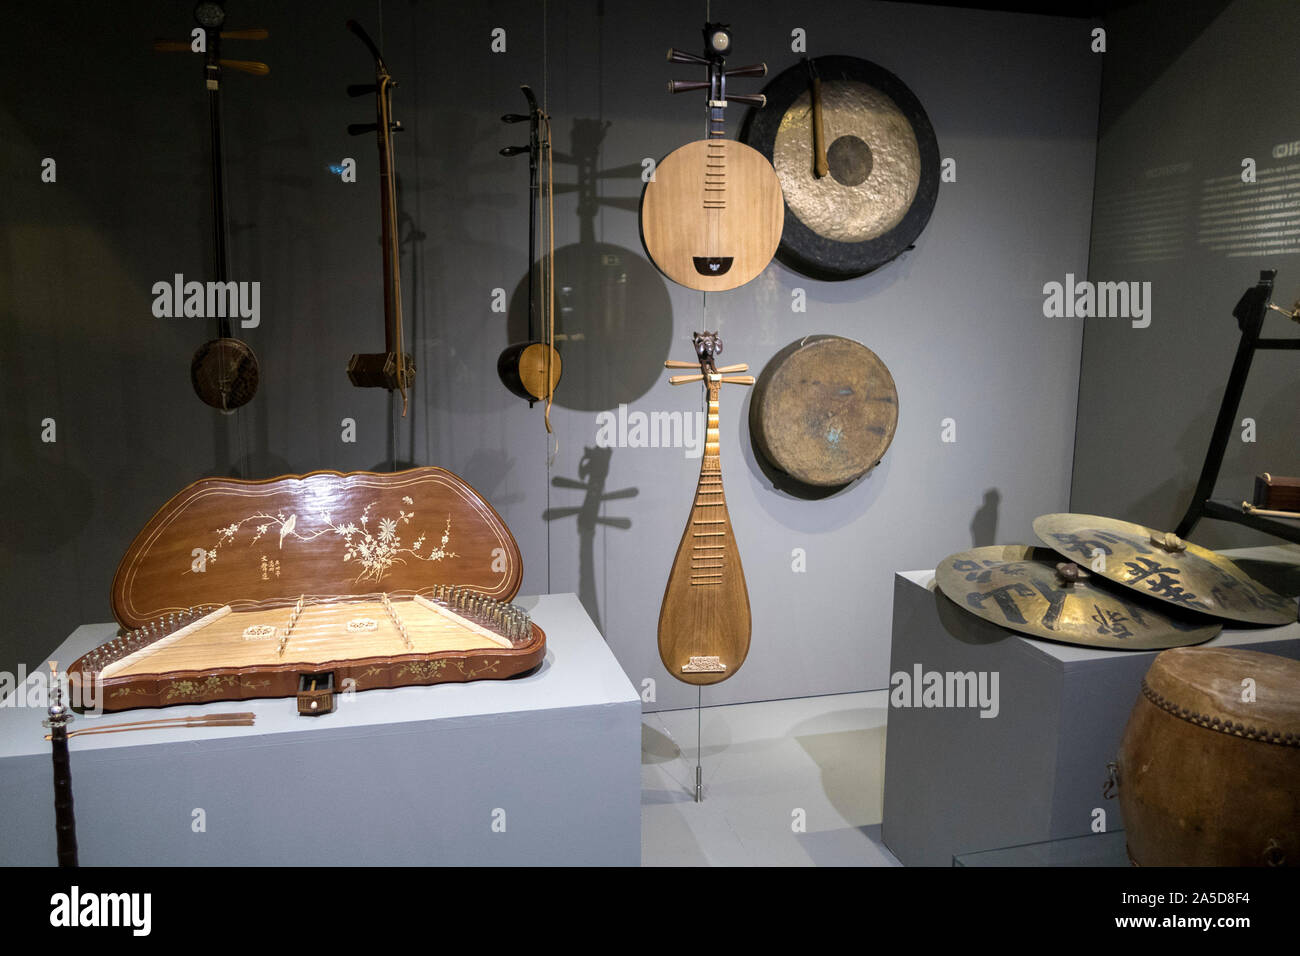 Ancient asian music instruments at the Museu do Oriente - Museum of the Orient in Lisbon, Portugal Stock Photo